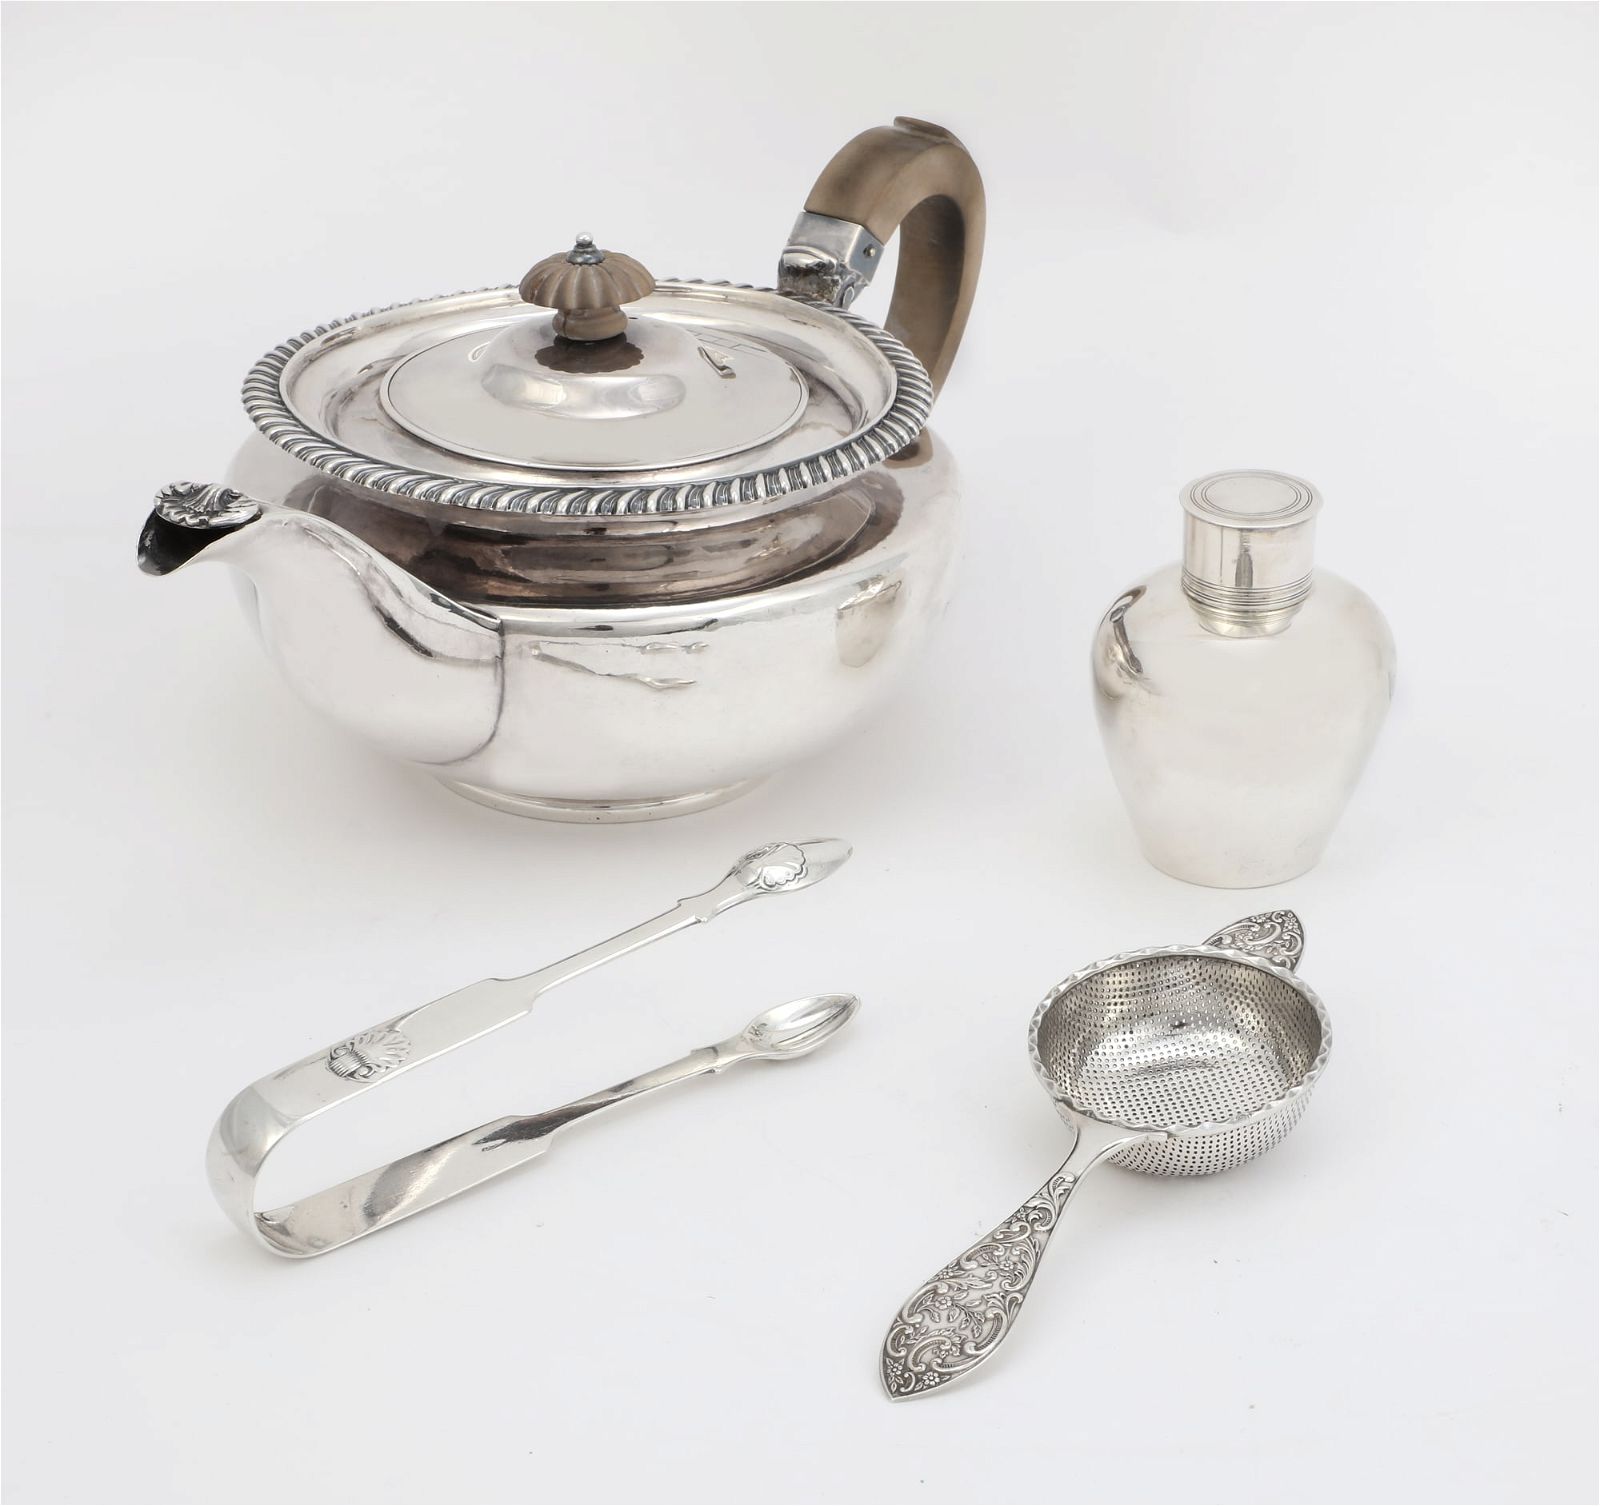 FOUR ENGLISH STERLING SILVER TEA